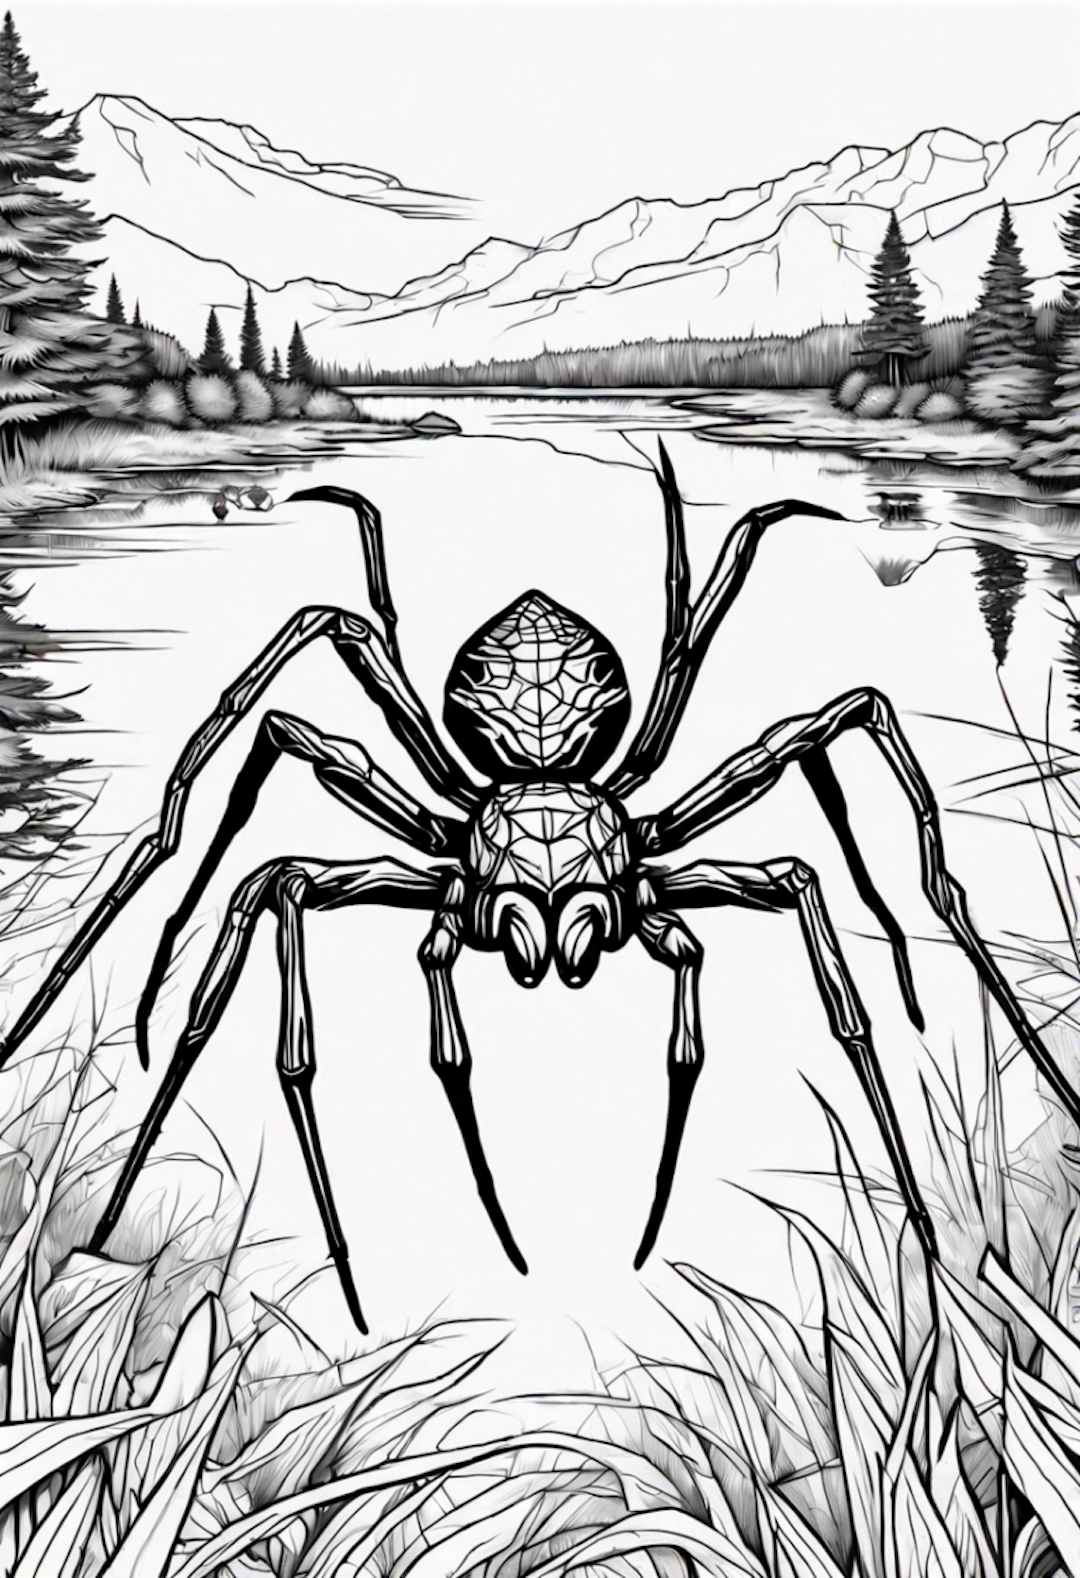 Spider by the Tranquil Lake coloring pages